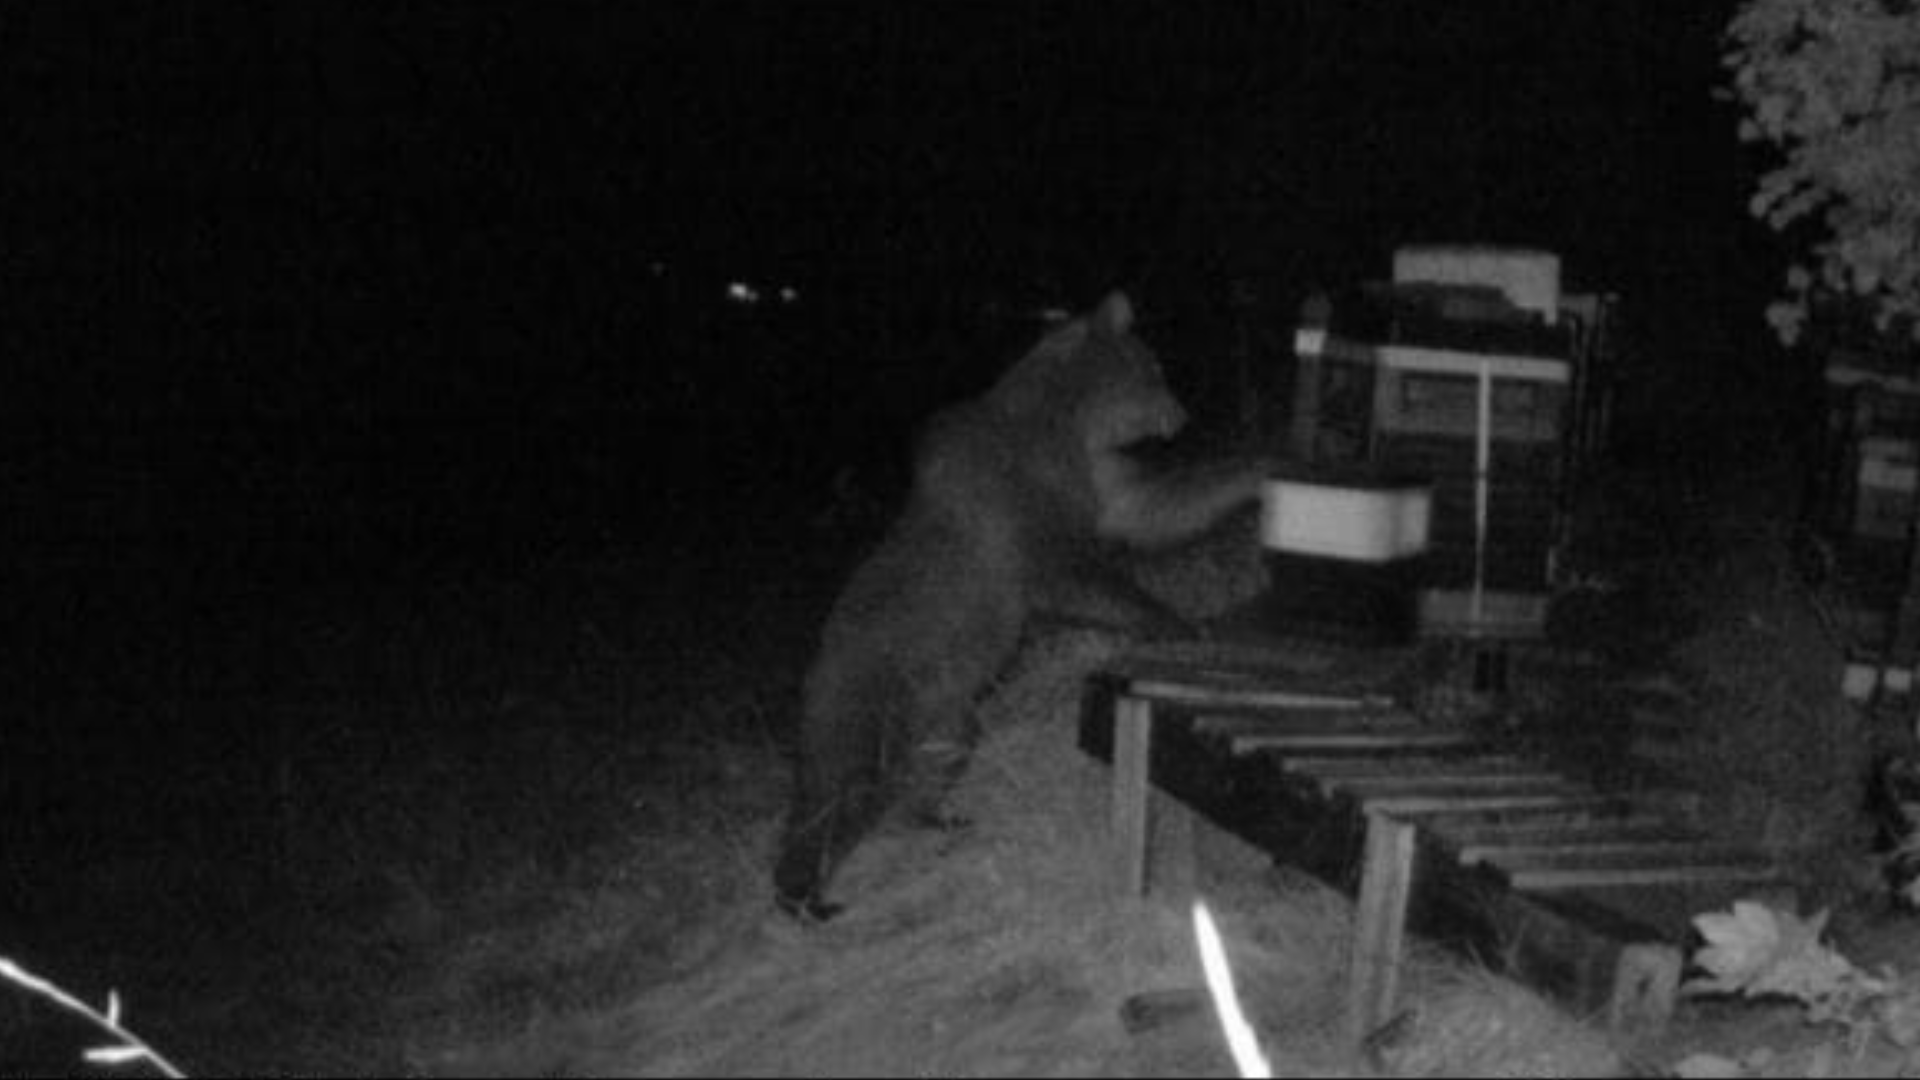 Master Petz has attacked beehives several times, as this photo from a wildlife camera shows. (Bild: zVg)